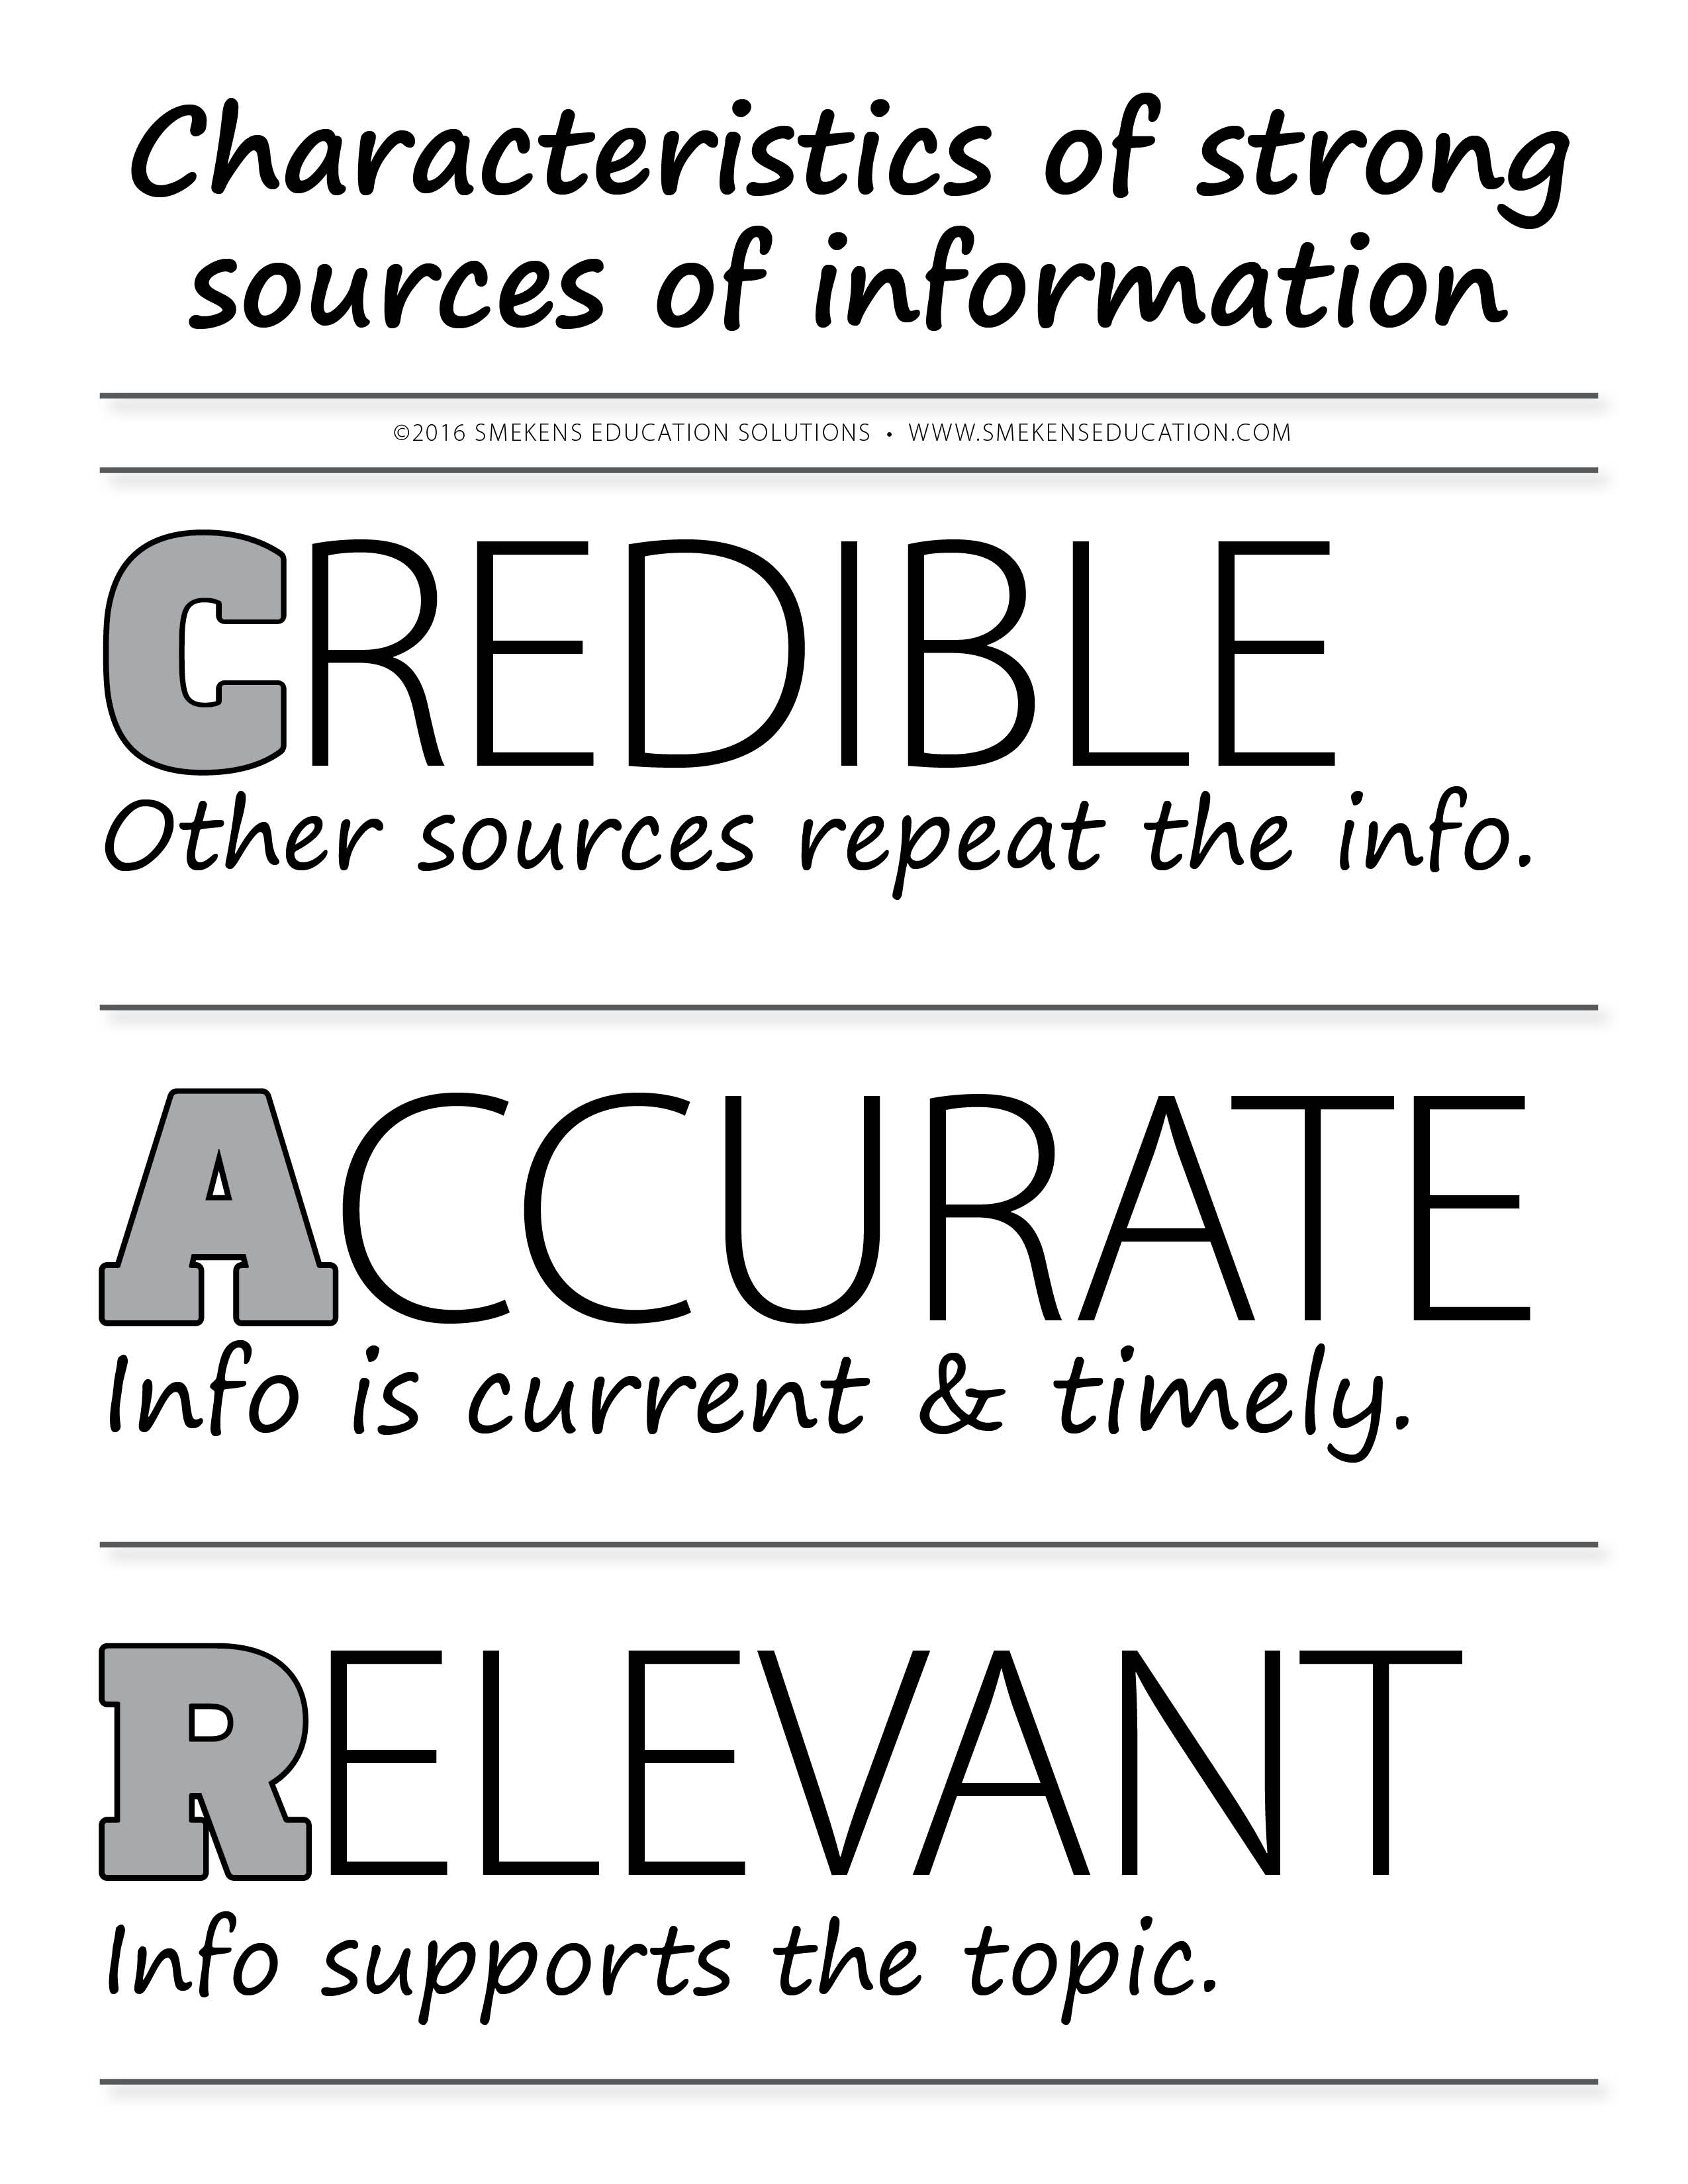 Characteristics of Strong Sources of Information - C.A.R. Acronym